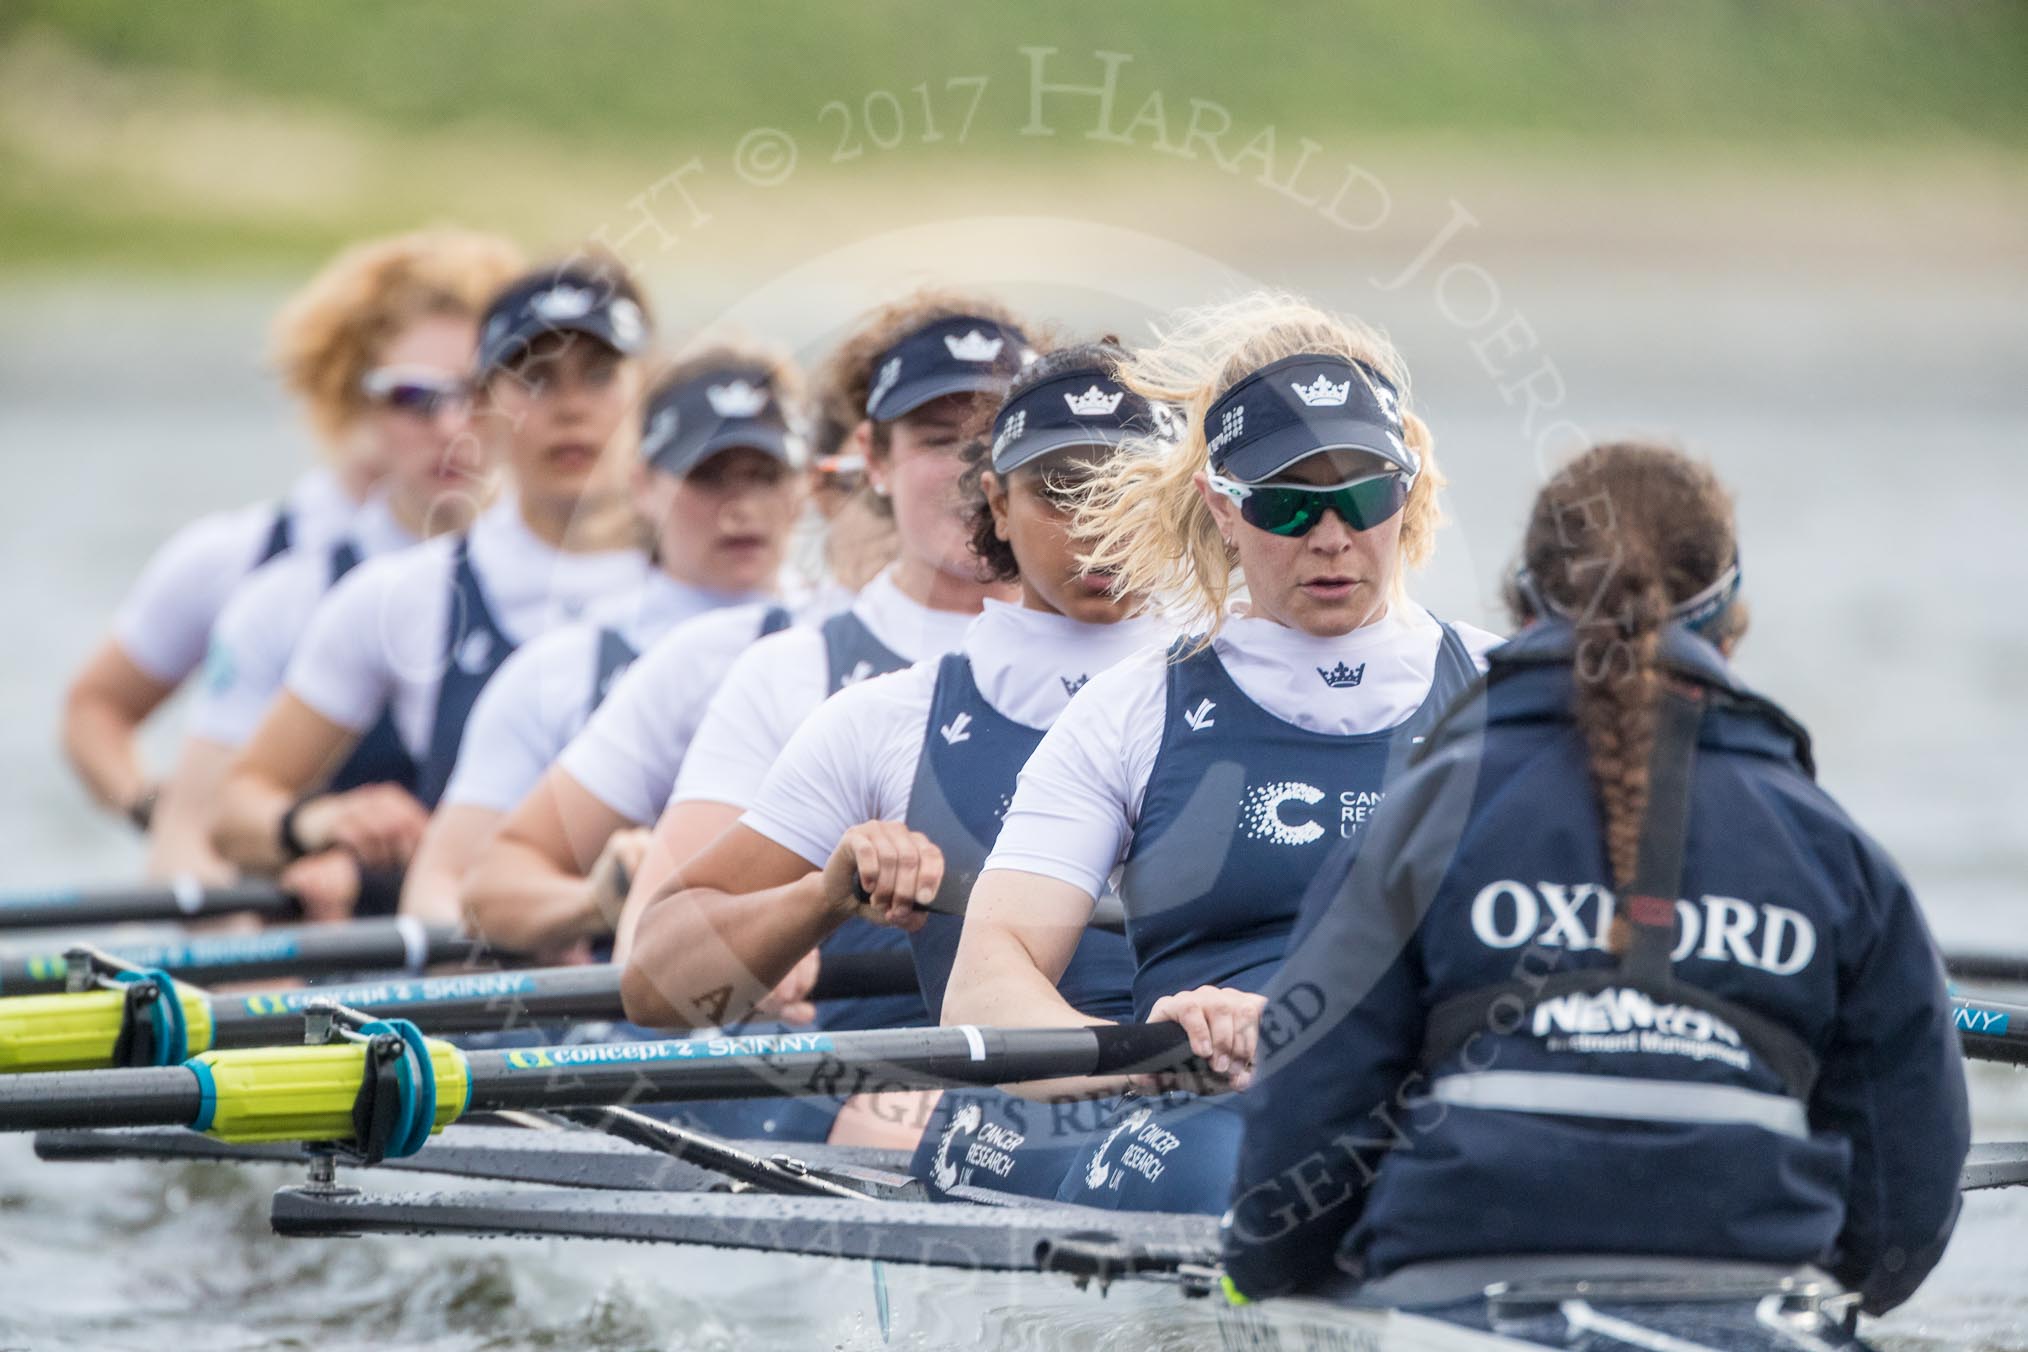 The Cancer Research UK Boat Race season 2017 - Women's Boat Race Fixture OUWBC vs Molesey BC: OUWBC during the second part of the fixture - bow Alice Roberts, 2 Beth Bridgman, 3 Rebecca Te Water Naude, 4 Rebecca Esselstein, 5 Chloe Laverack, 6 Harriet Austin, 7 Jenna Hebert, stroke Emily Cameron, cox Eleanor Shearer.
River Thames between Putney Bridge and Mortlake,
London SW15,

United Kingdom,
on 19 March 2017 at 16:21, image #135